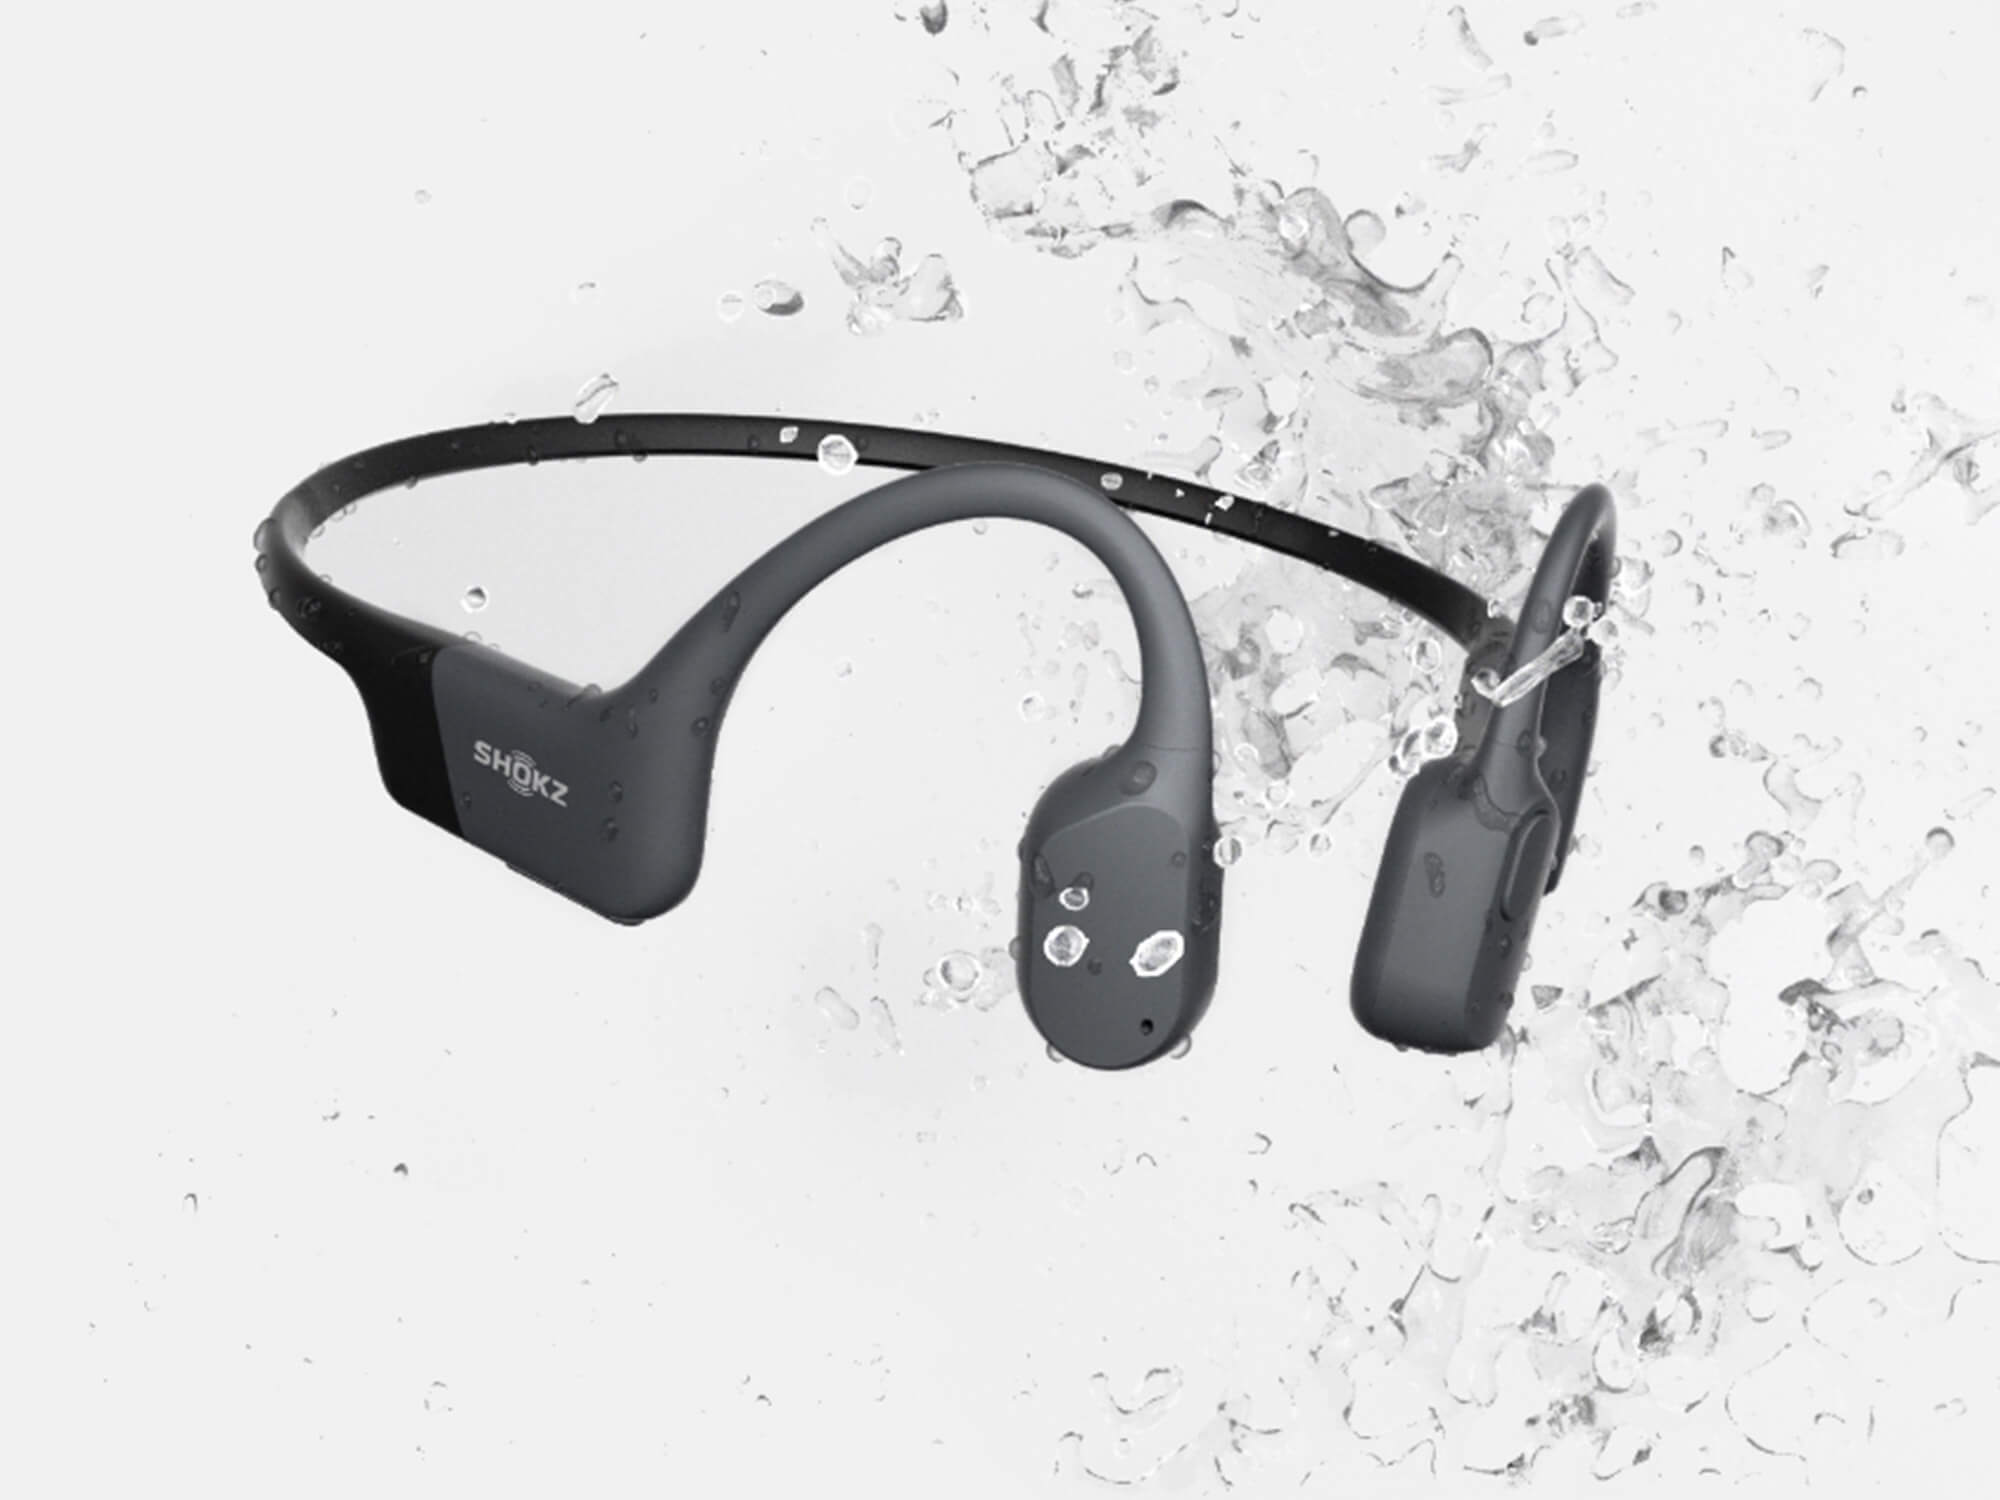 AfterShokz is now just Shokz, announces Aeropex will be rebranded as OpenRun